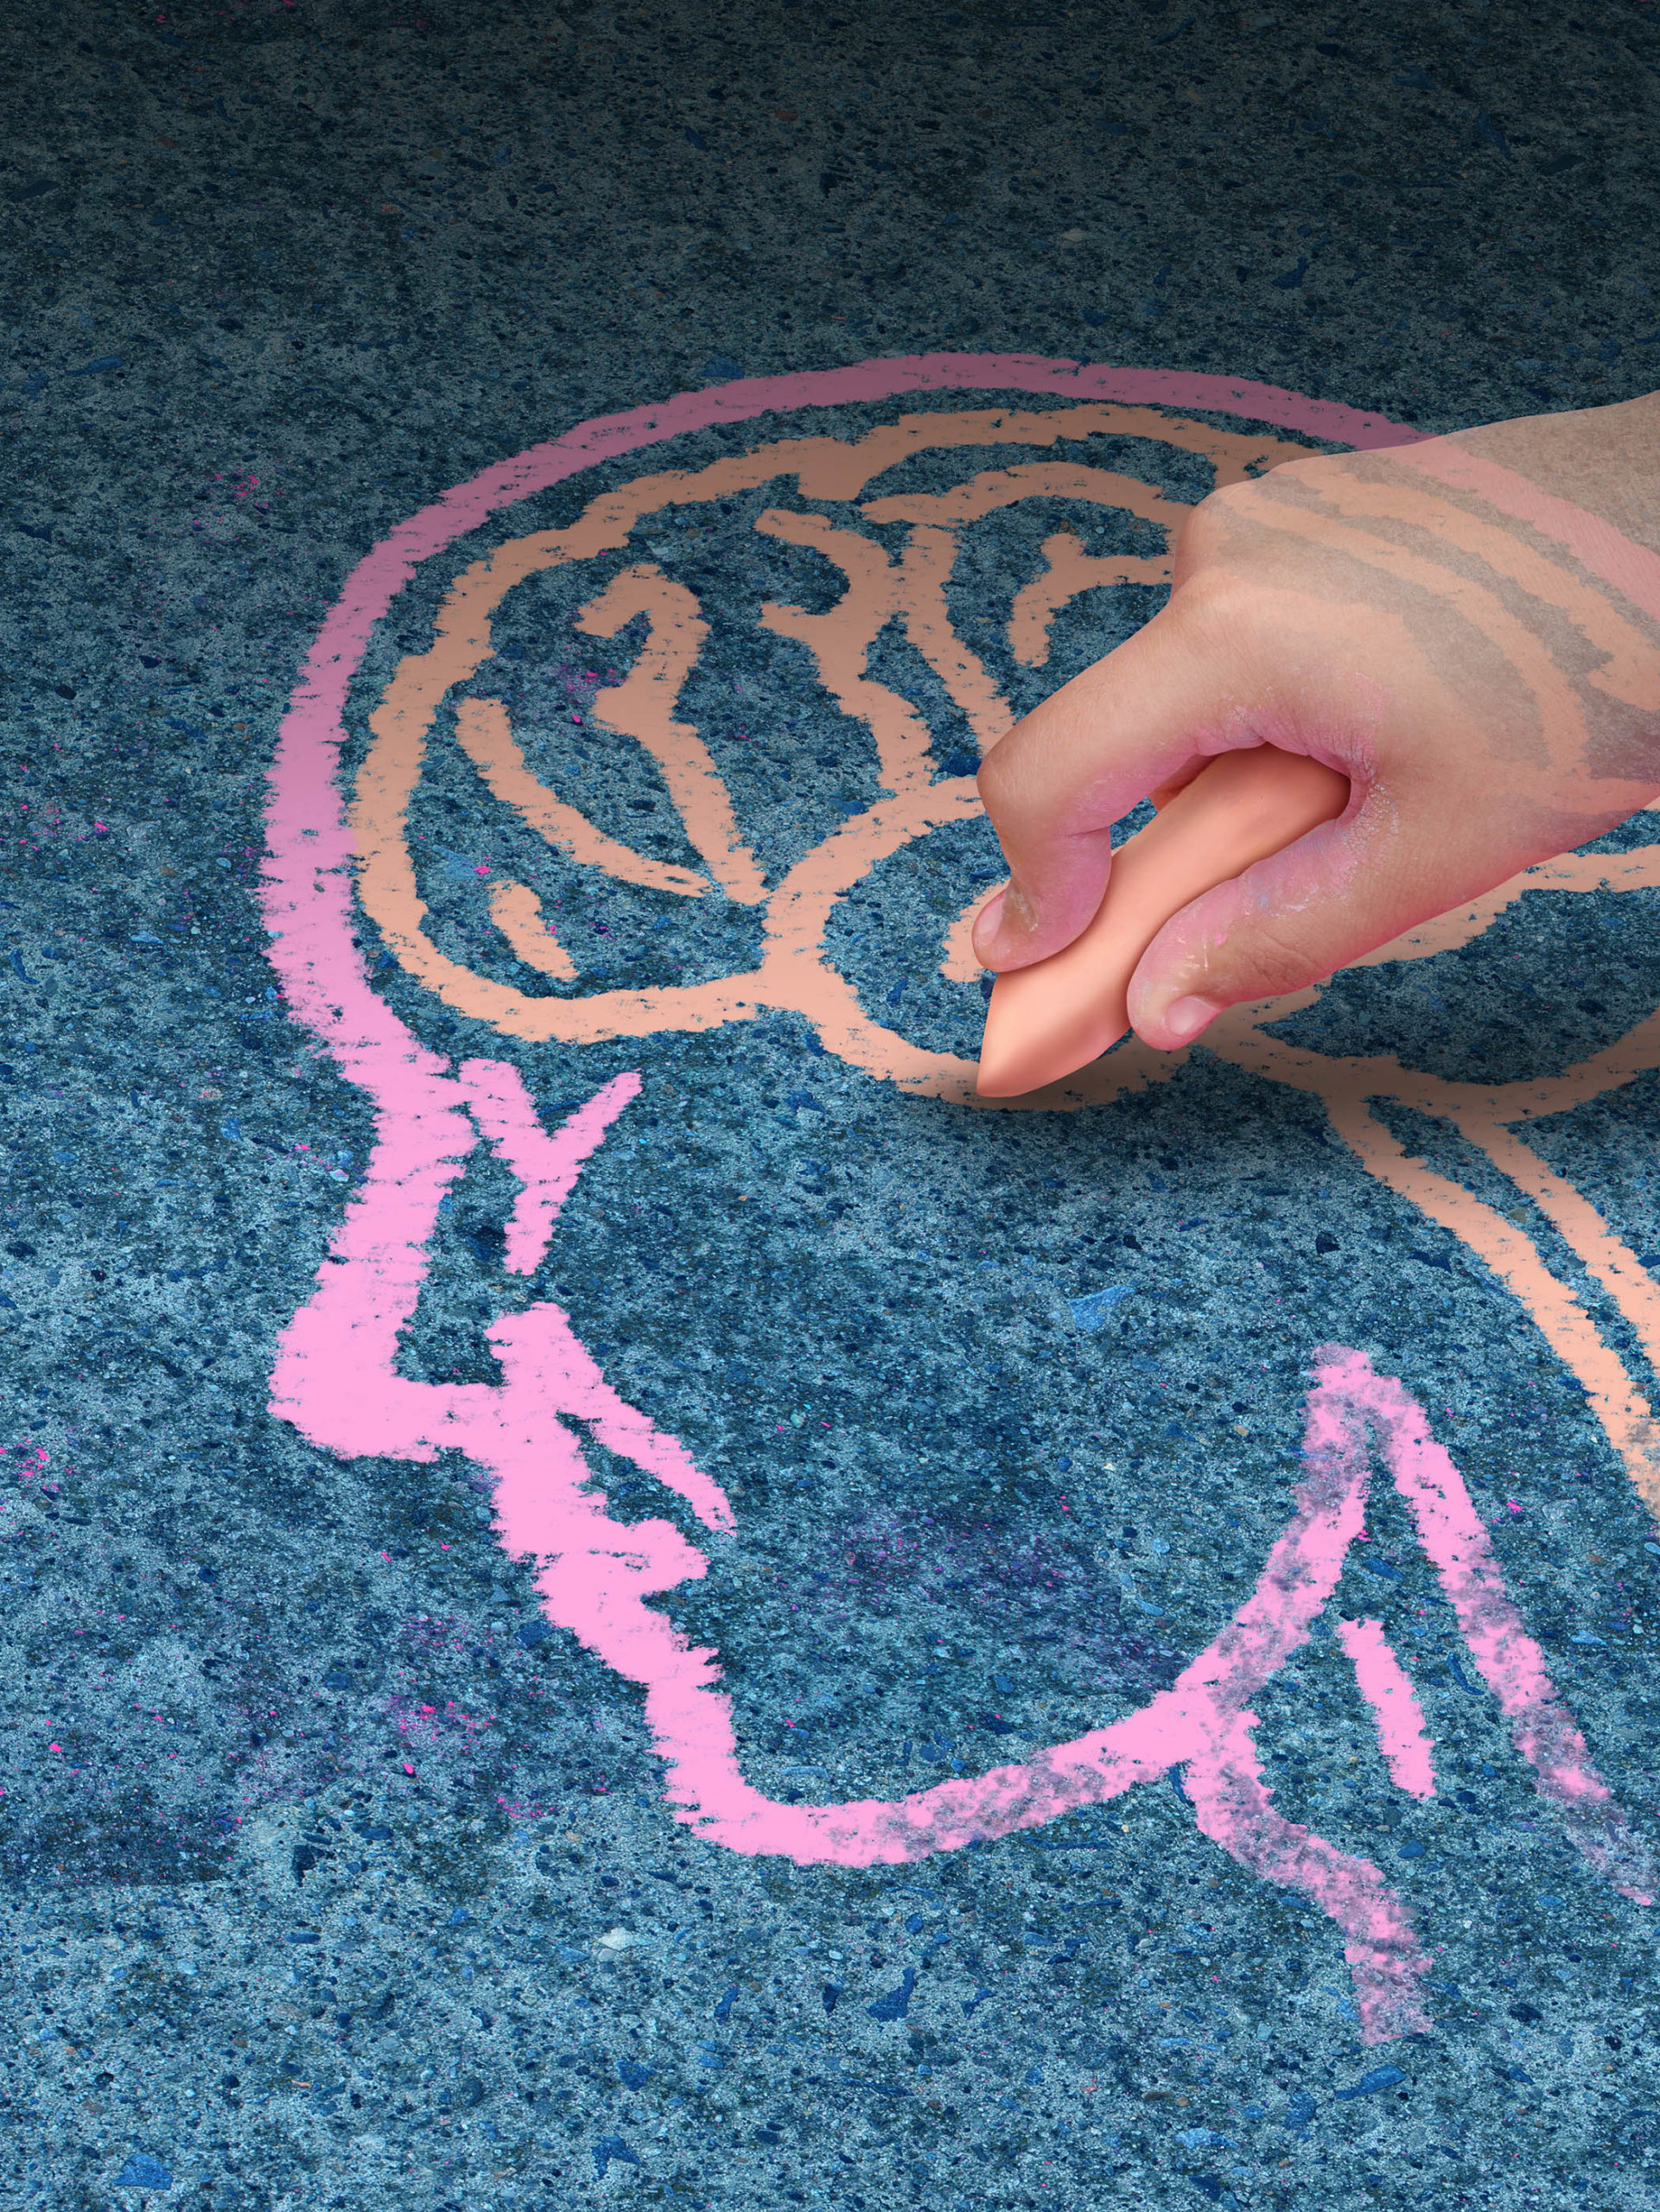 hand of a child drawing a human head and brain with chalk on a cement floor